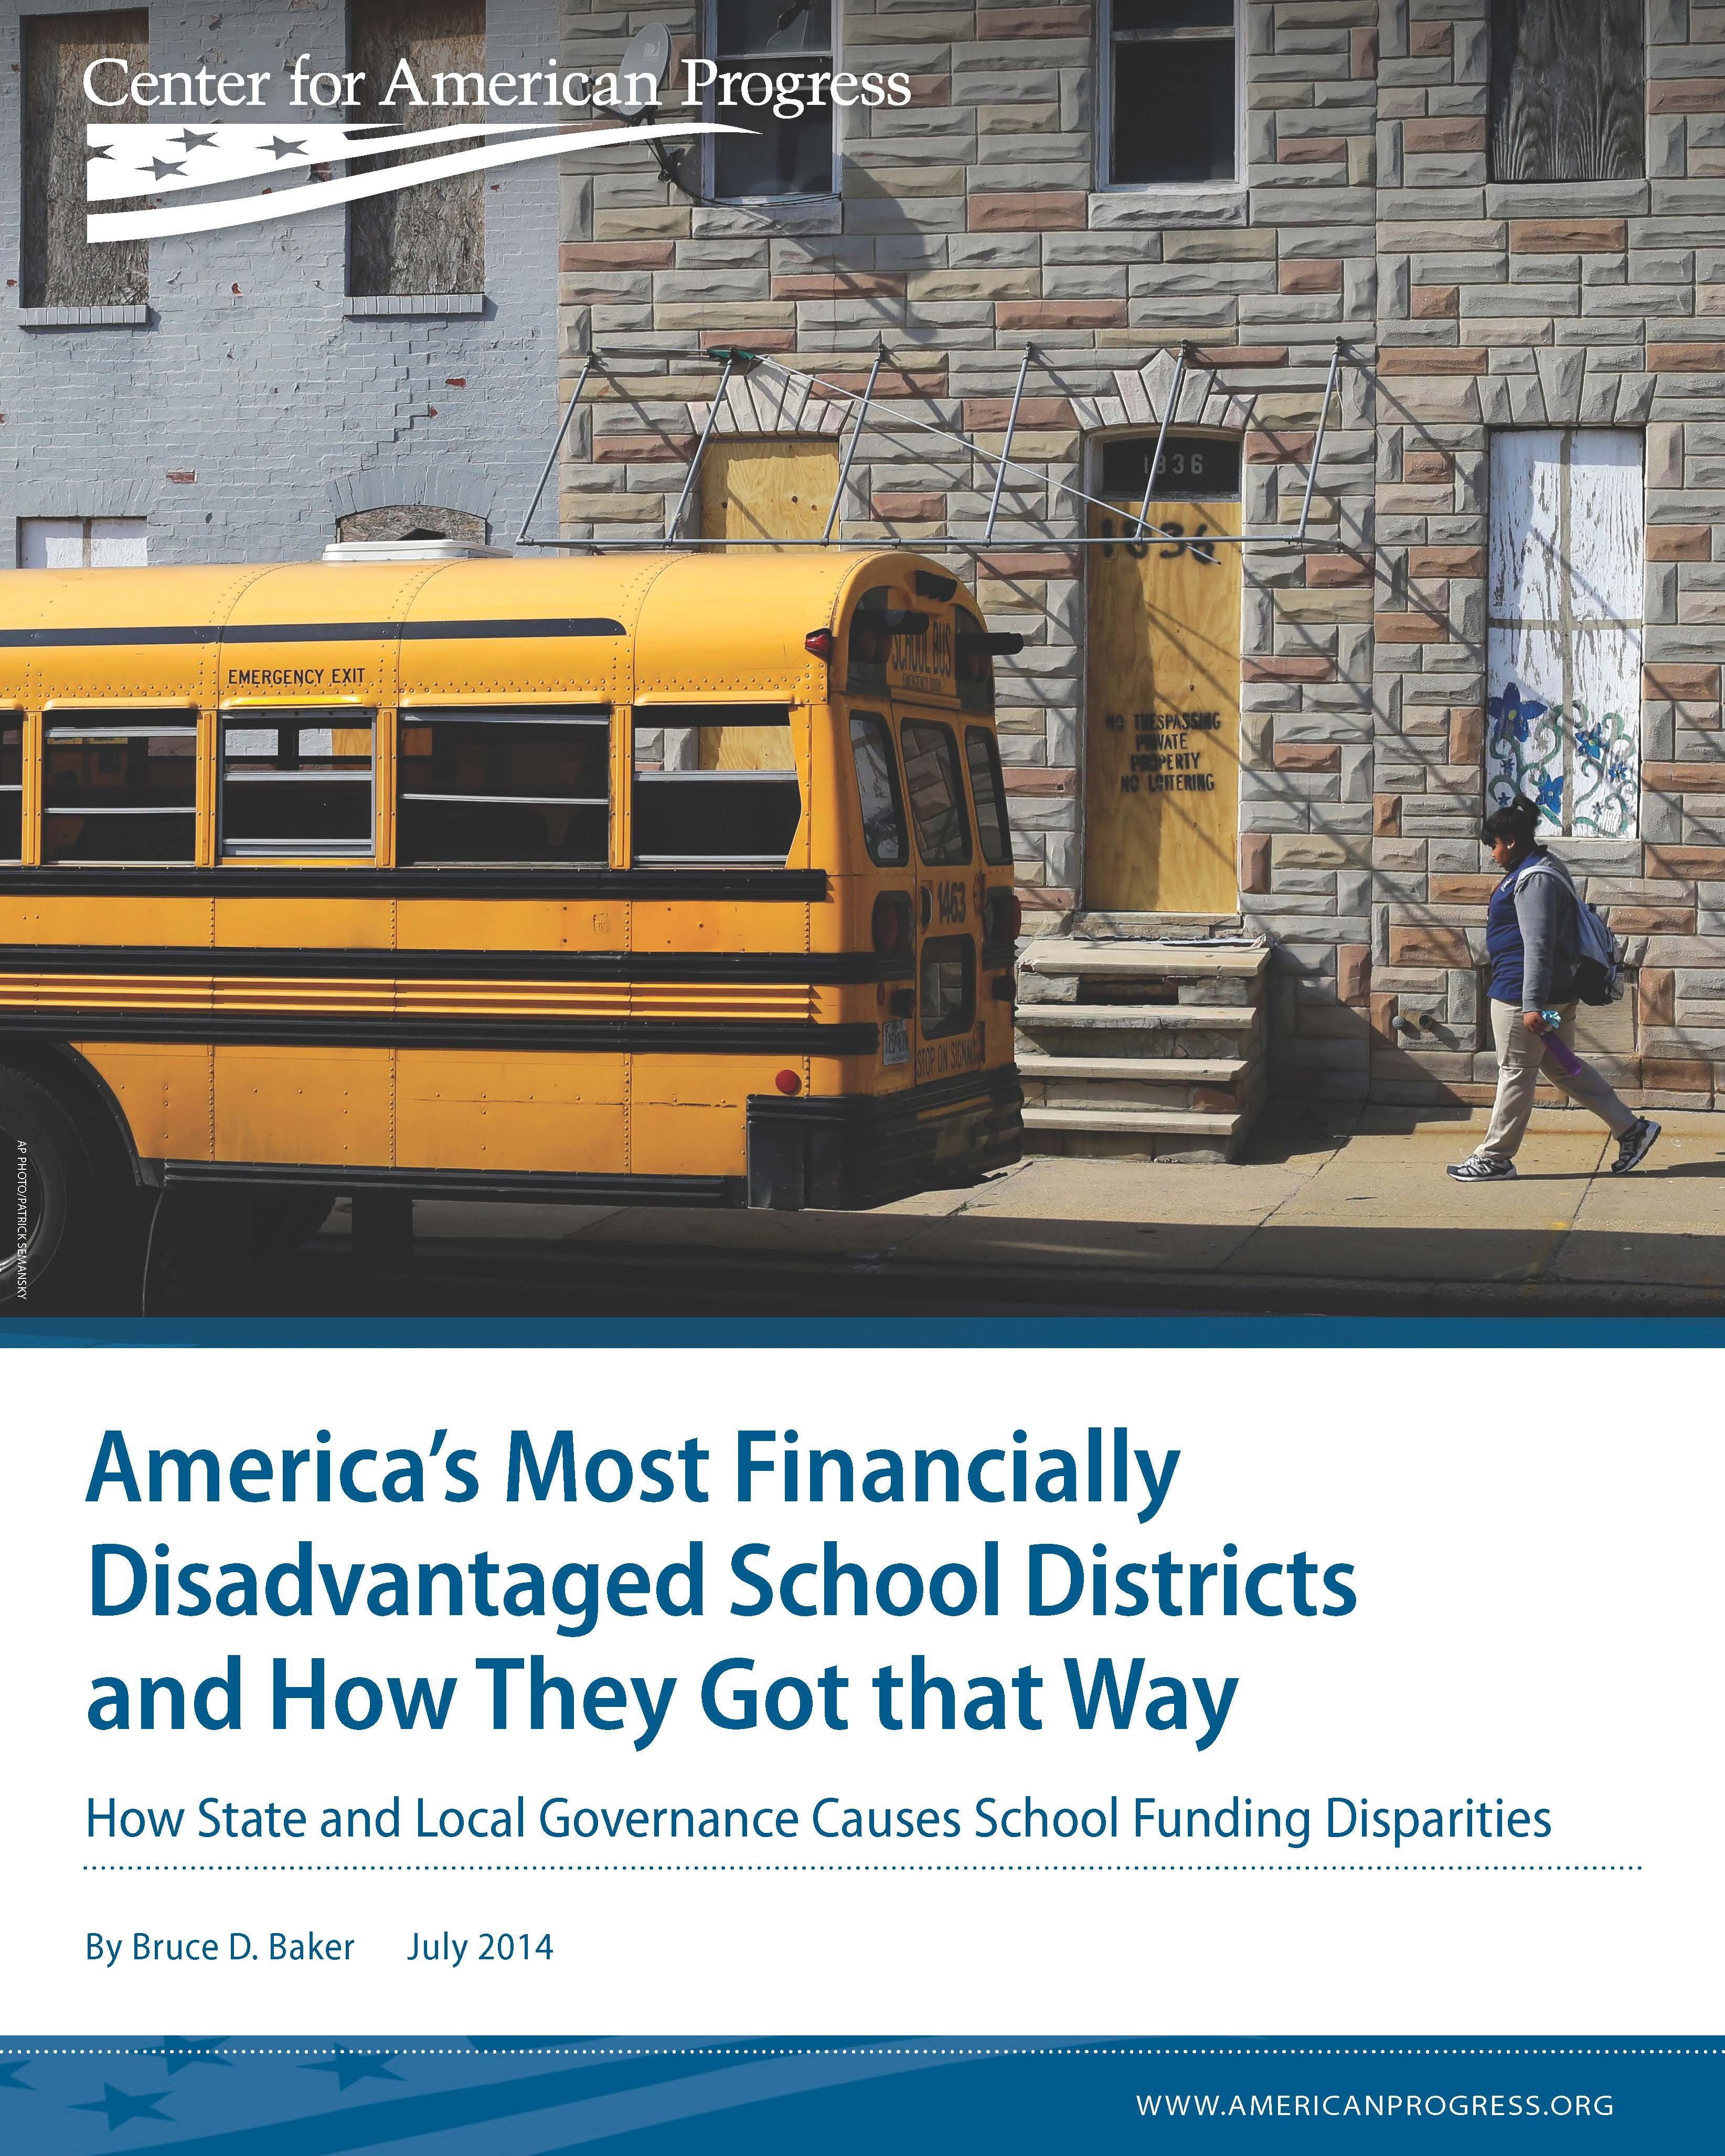 America’s Most Financially Disadvantaged School Districts and How They Got that Way